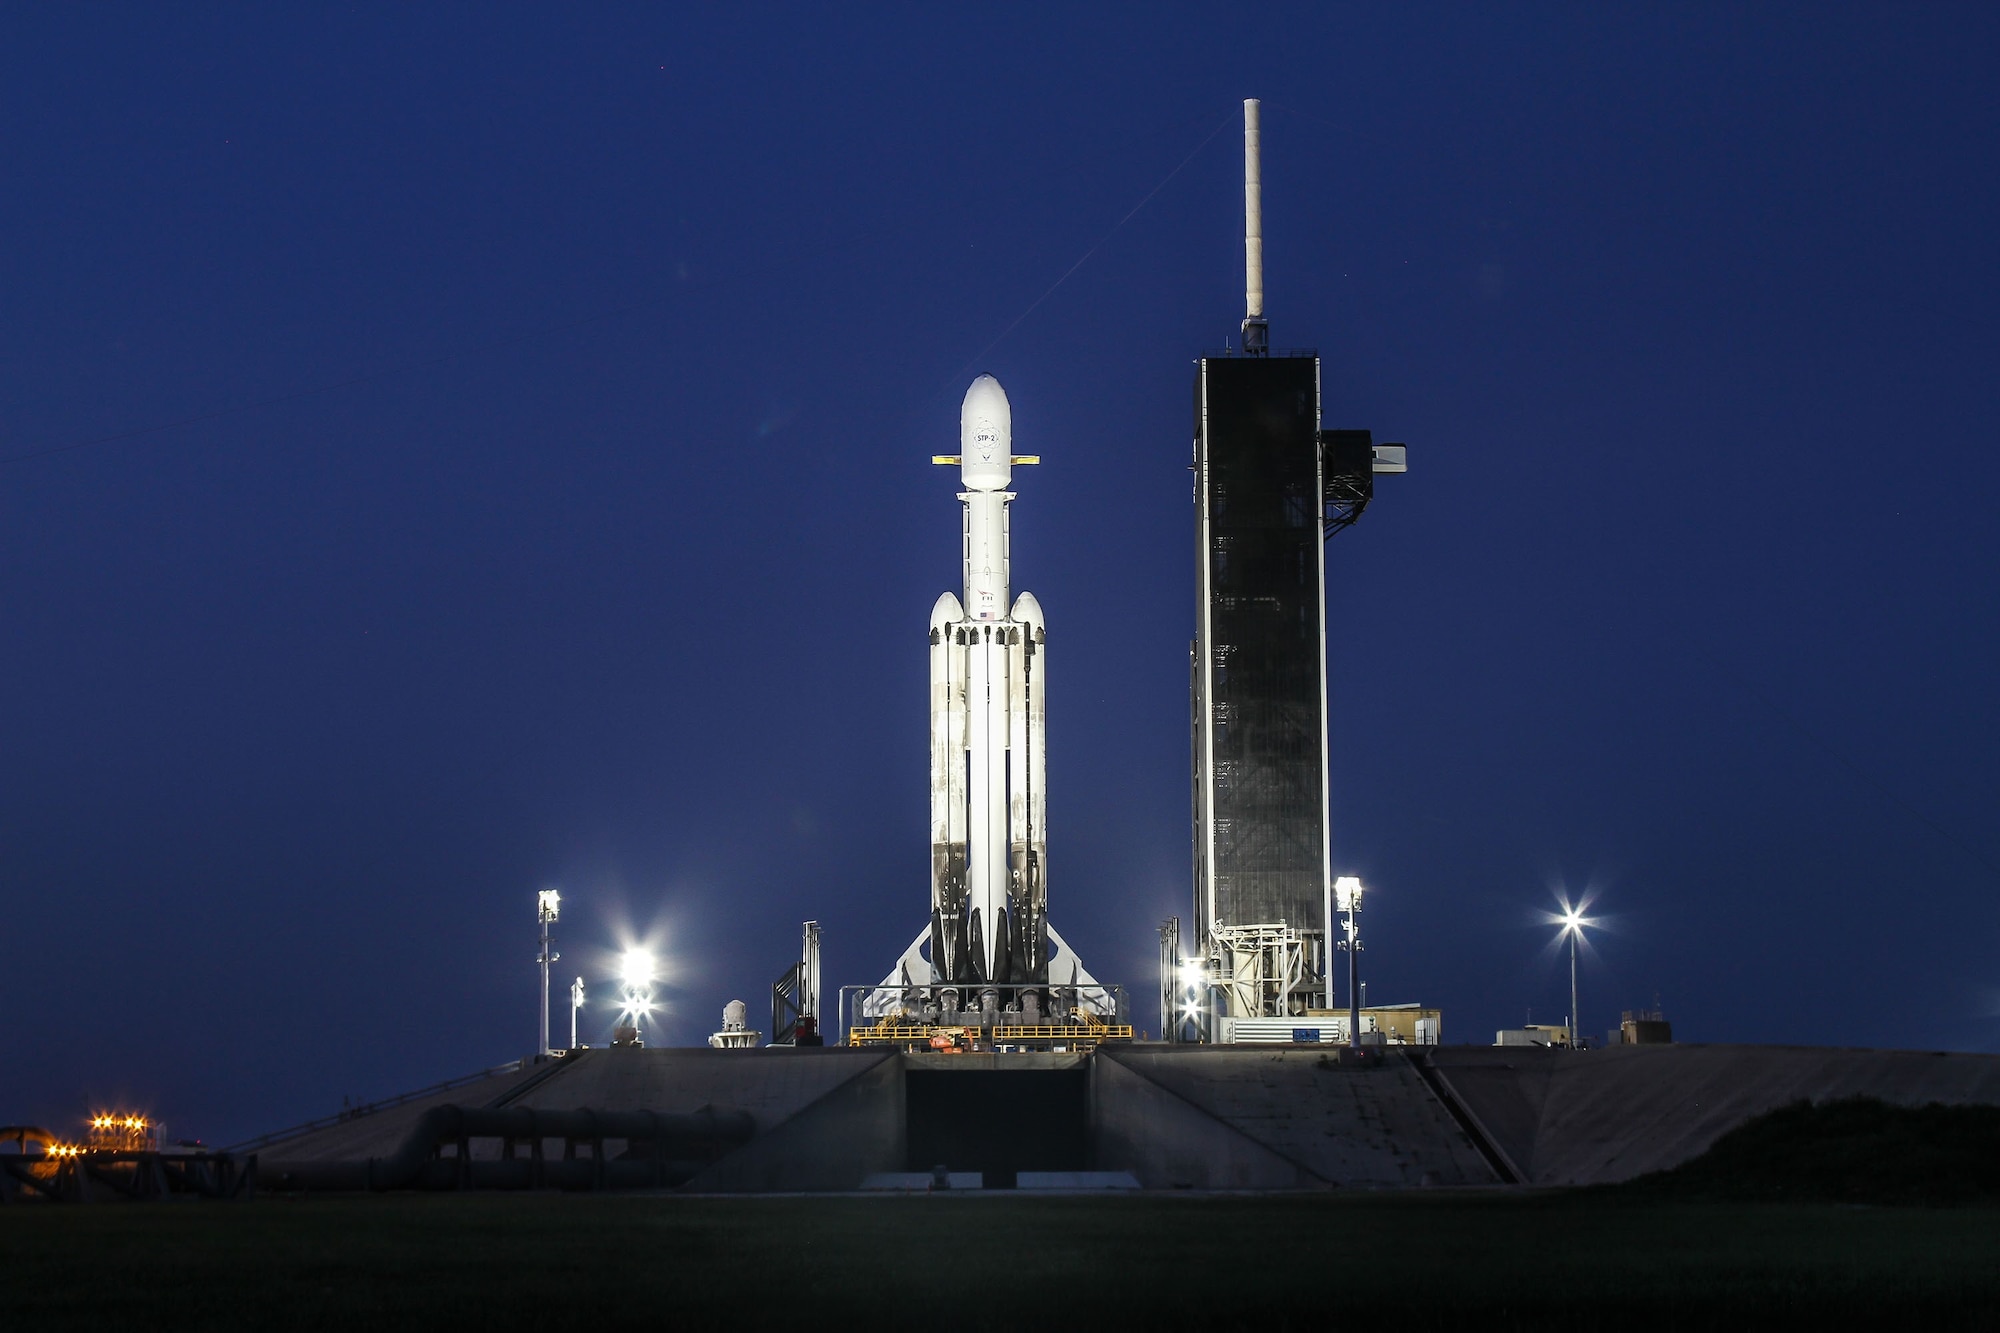 Sporting two, previously used side boosters, the SpaceX Falcon Heavy launch vehicle stands tall on Launch Complex-39A at NASA's Kennedy Space Center in the early morning hours of June 24, 2019. The four-hour launch window opens tonight at 11:30 p.m. Eastern, 8:30 p.m. Pacific. (Photo: SpaceX)